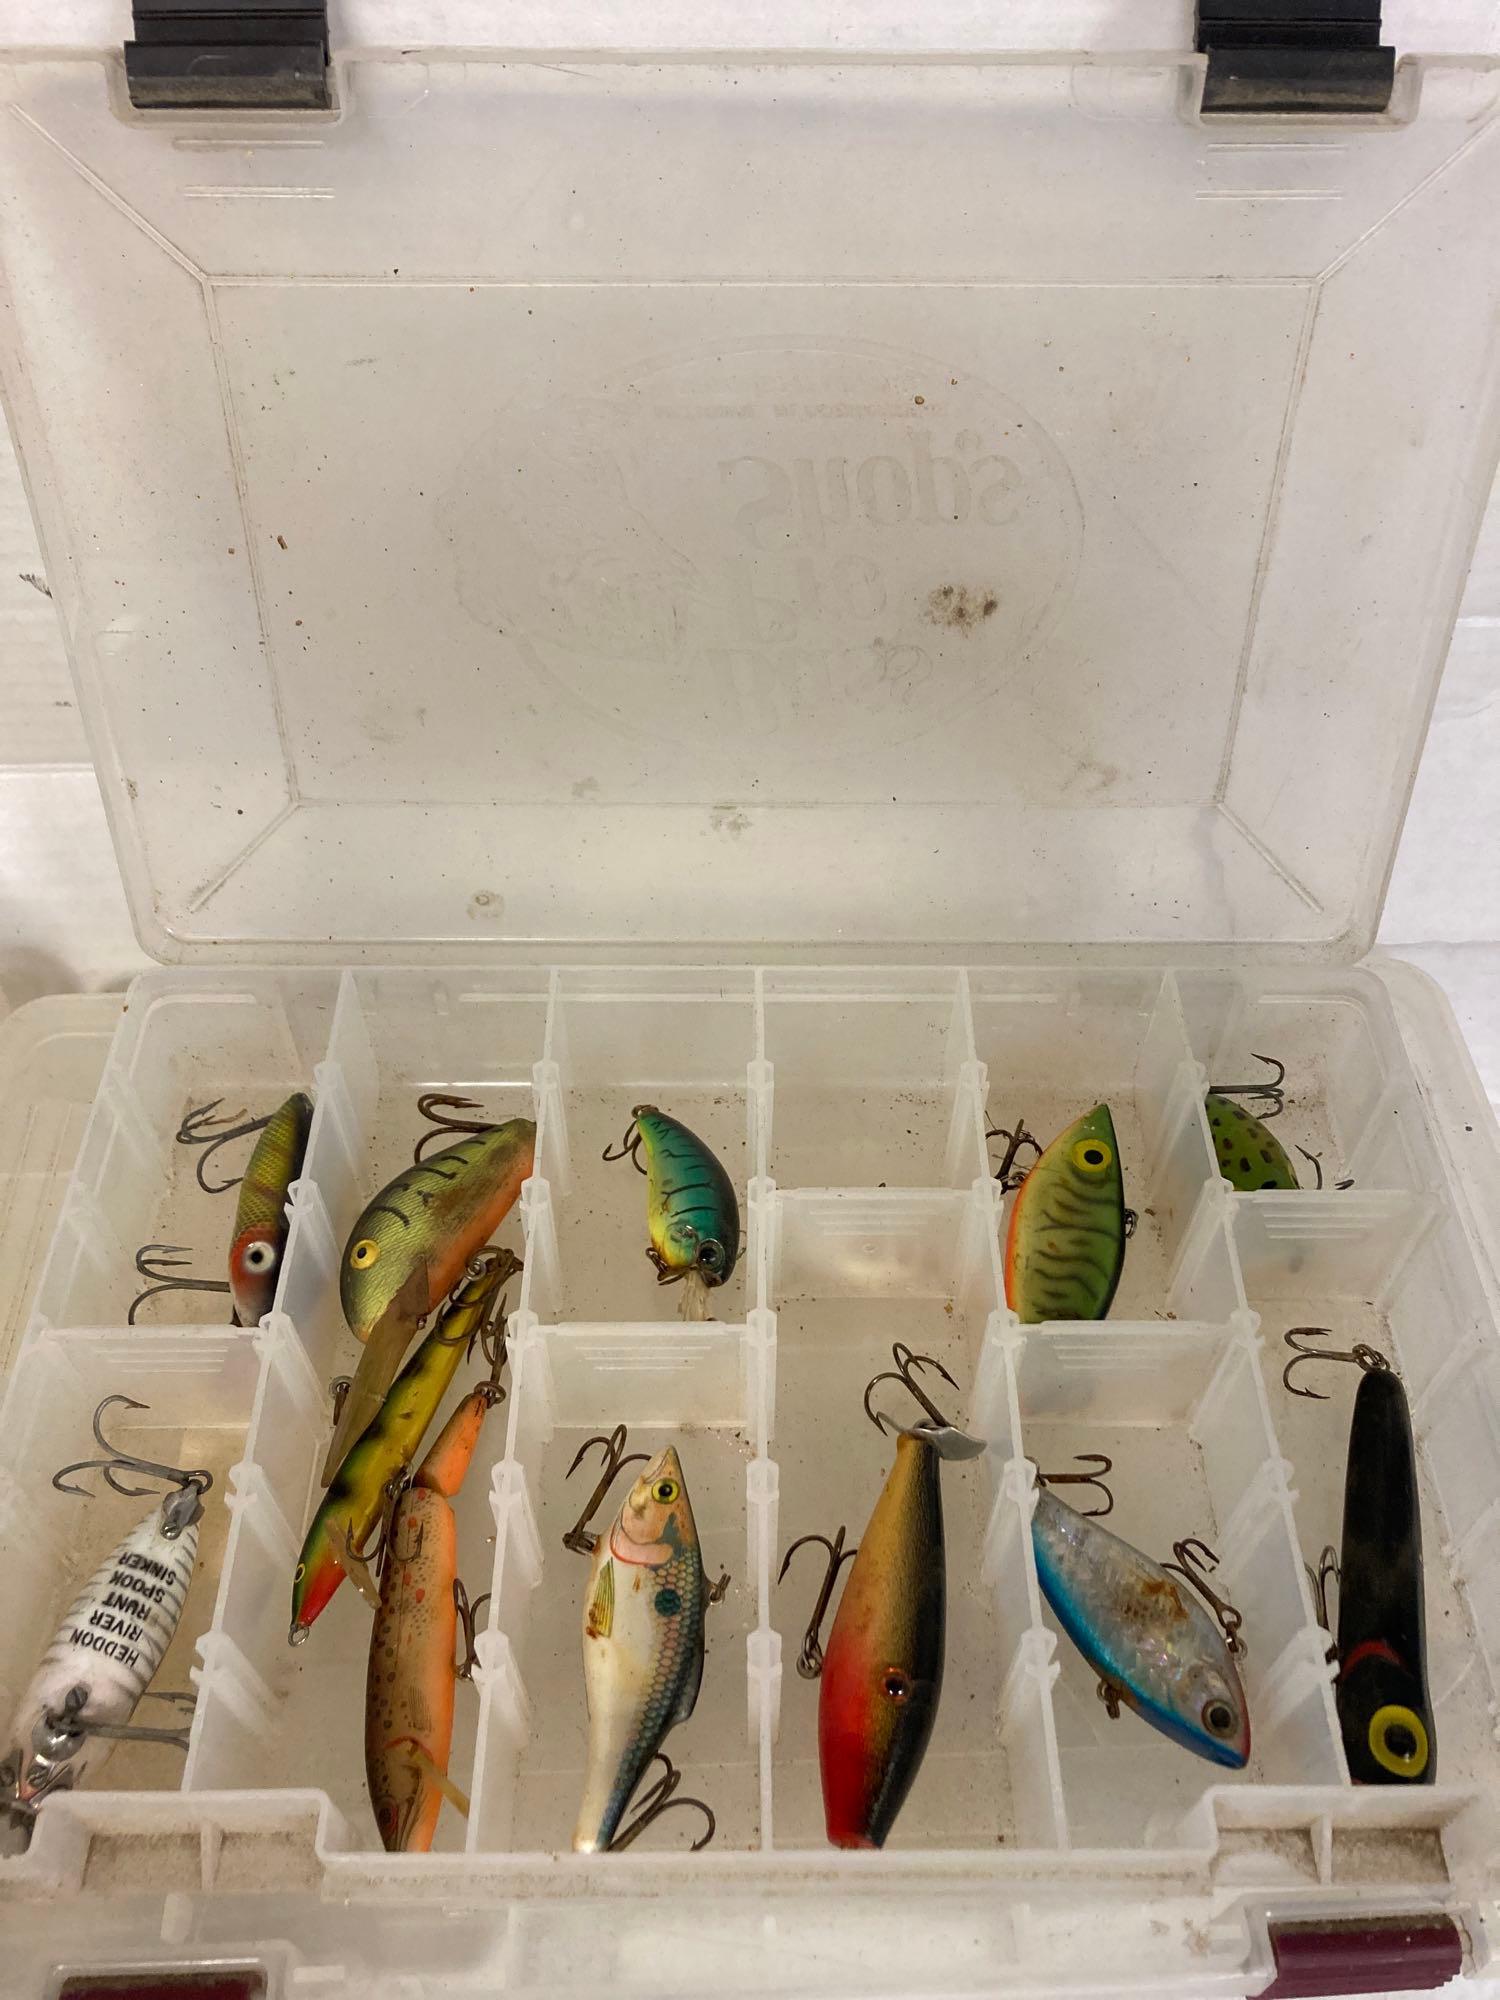 4 tackle boxes one with lures and 3 reels